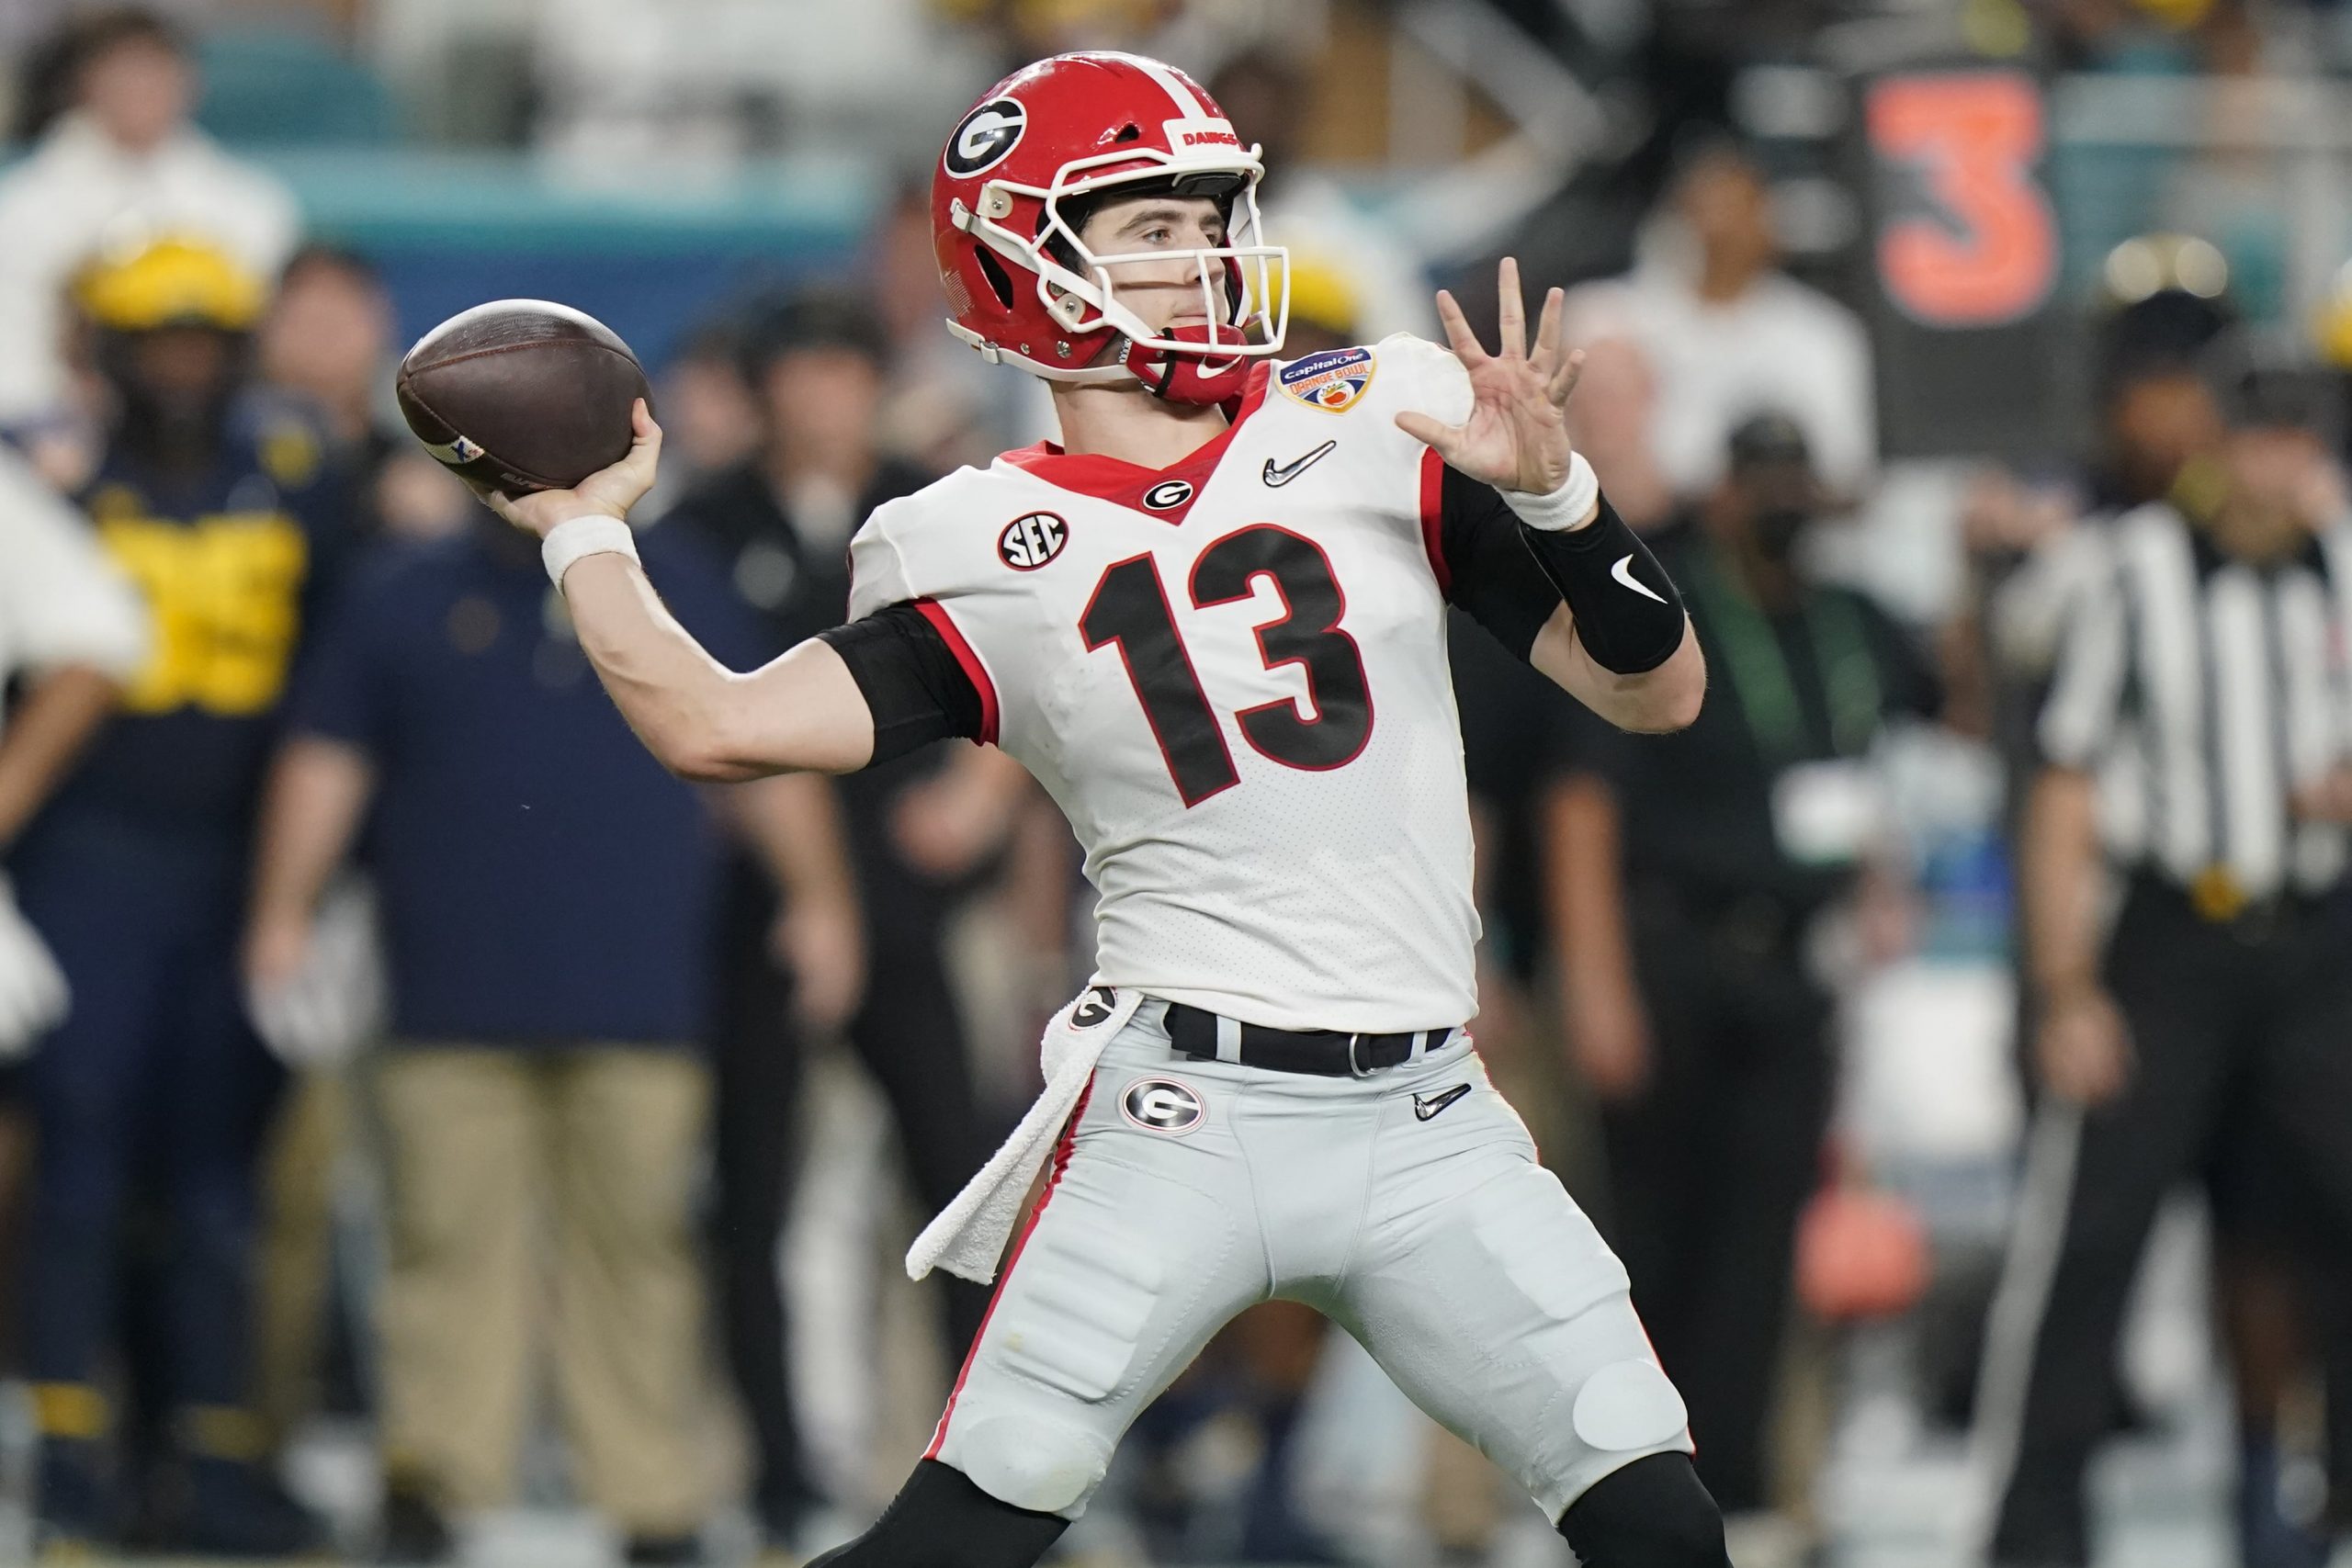 Georgia quarterback Stetson Bennett passes against Michigan during the first half of the Orange Bowl NCAA College Football Playoff semifinal game, Friday, Dec. 31, 2021, in Miami Gardens, Fla.